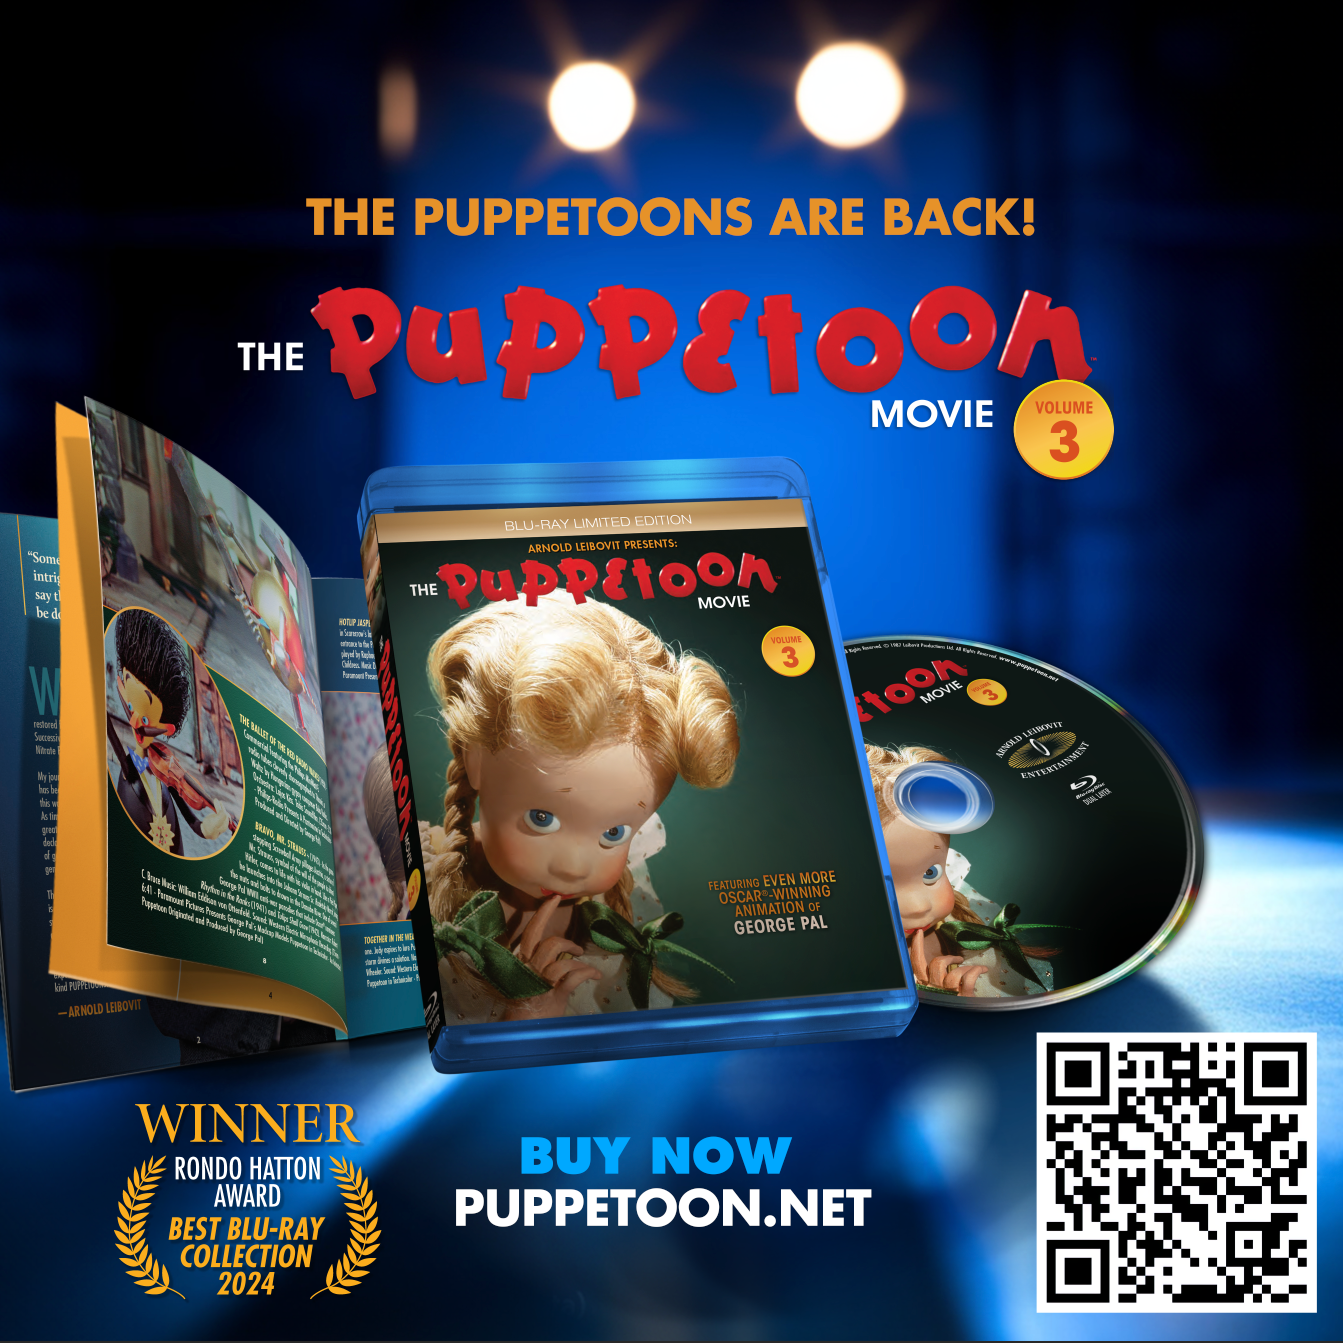 The Puppetoon Movie Volume 3 Blu-ray Limited Edition